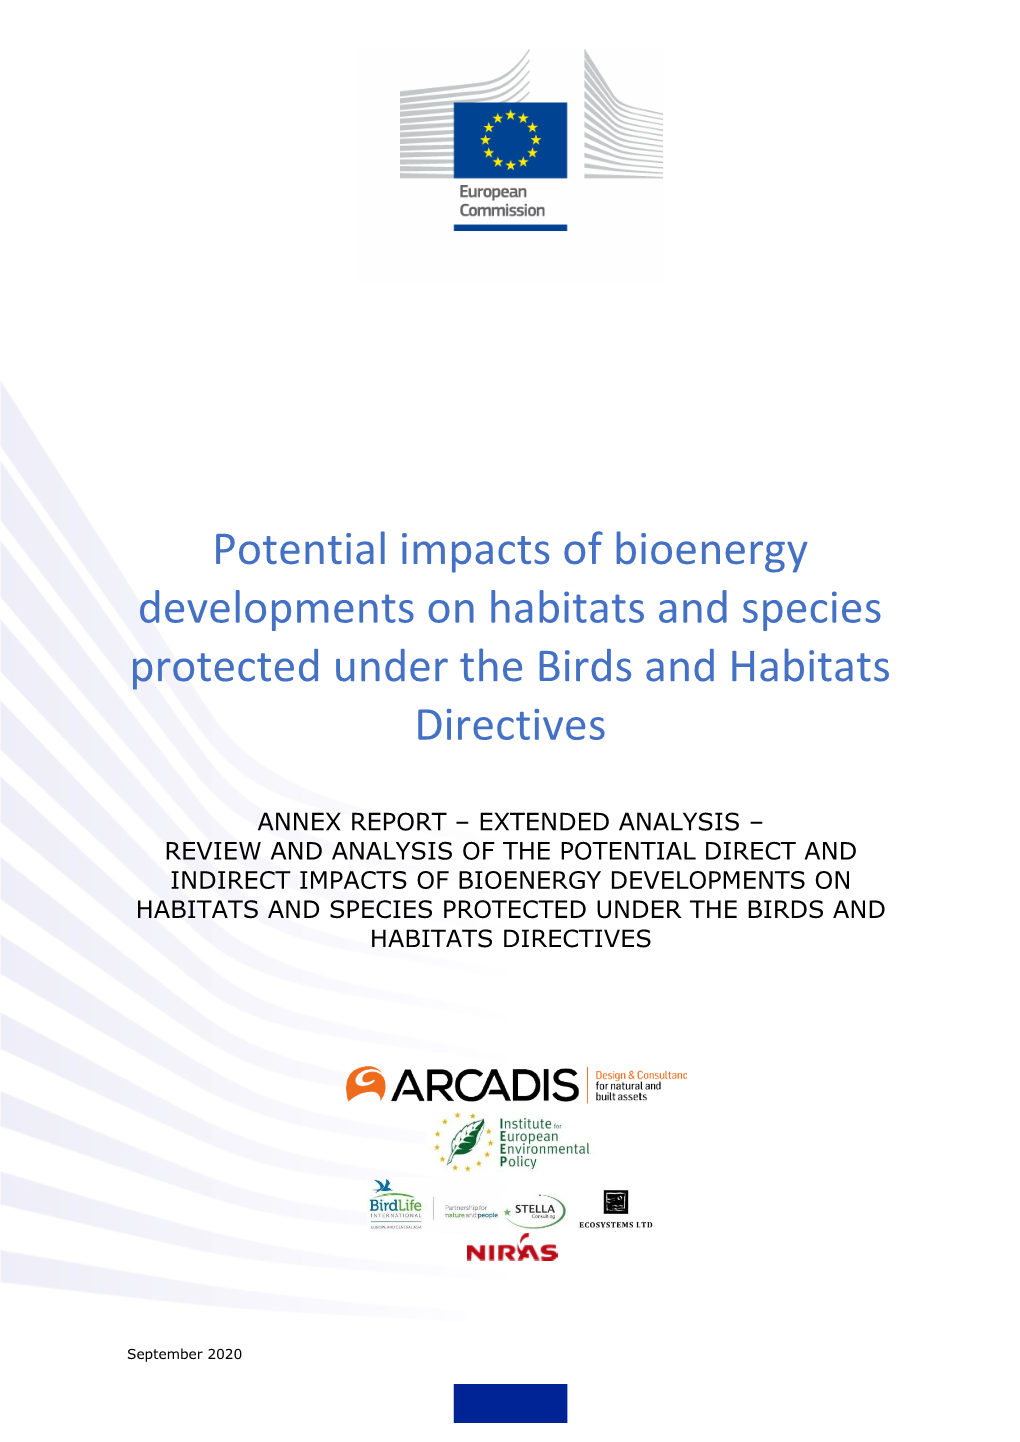 Potential Impacts of Bioenergy Developments on Habitats and Species Protected Under the Birds and Habitats Directives